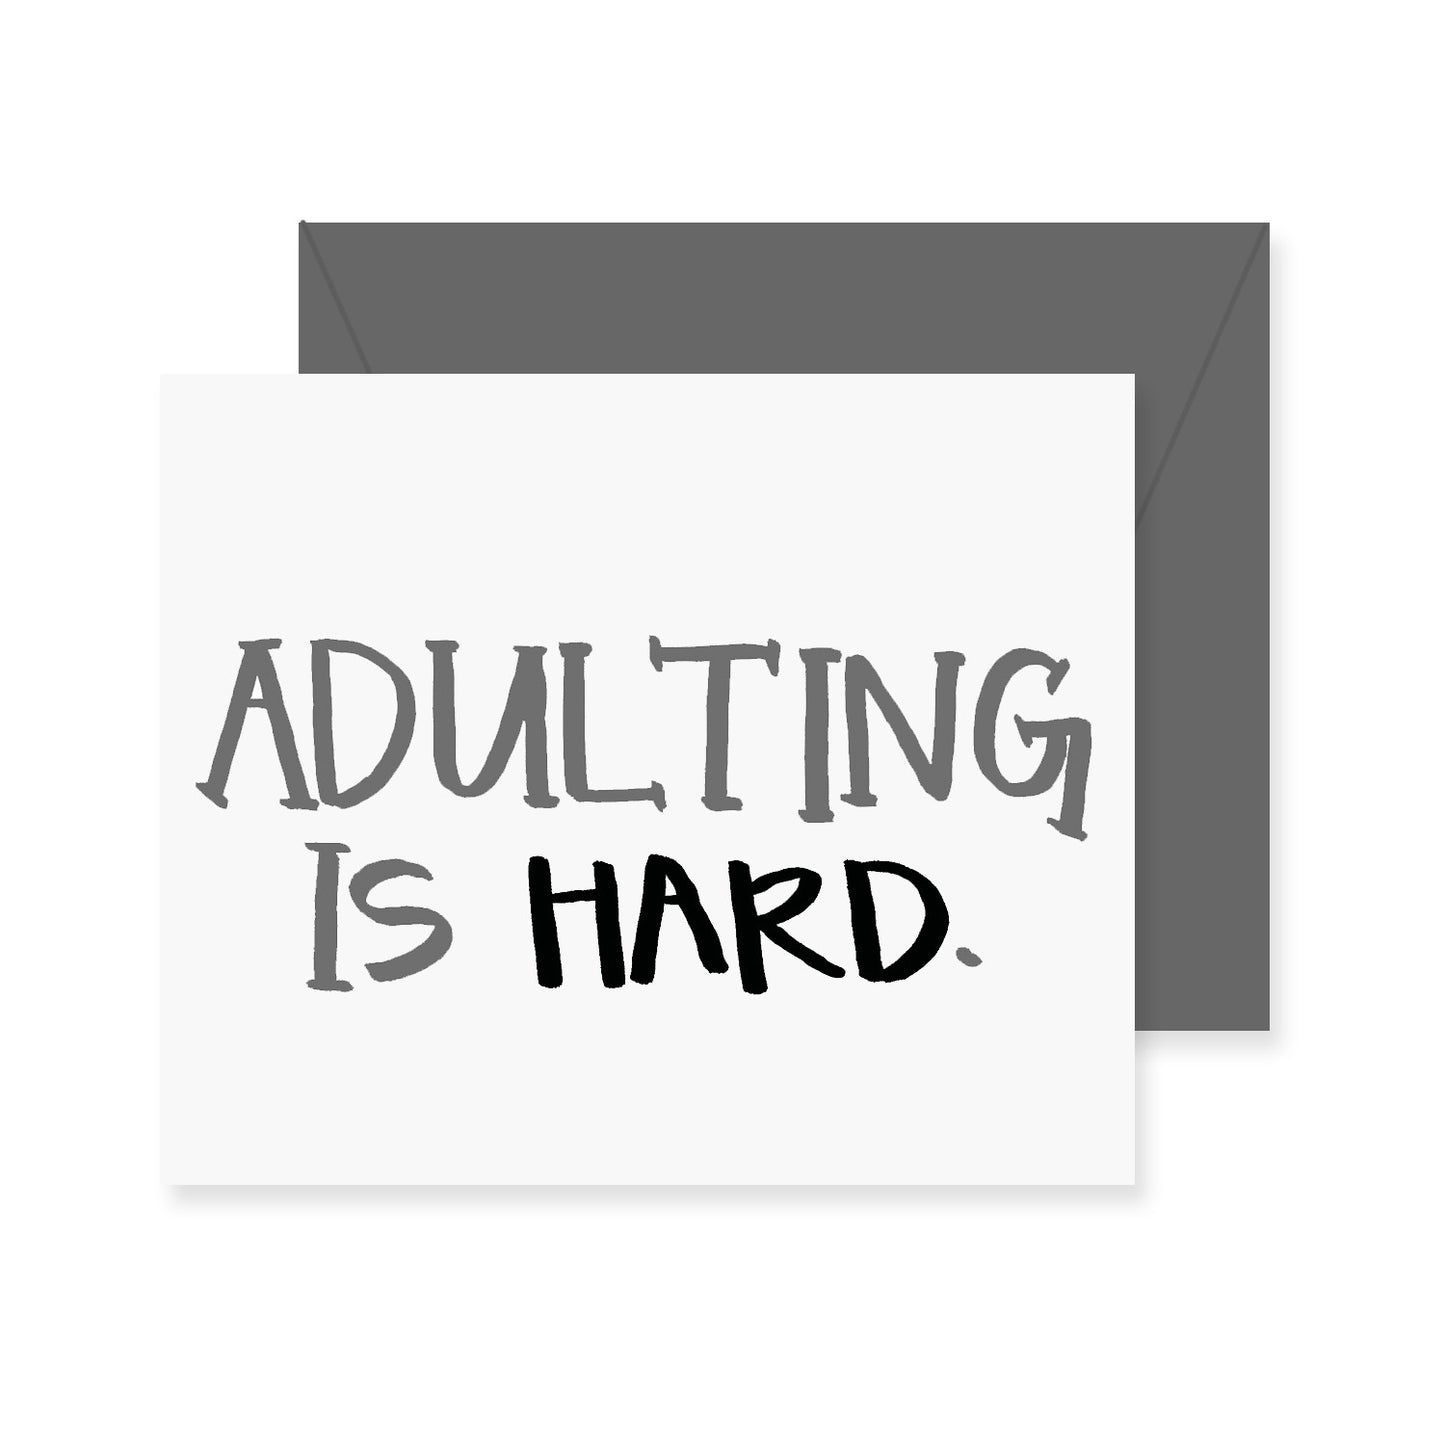 Adulting Is Hard Greeting Card